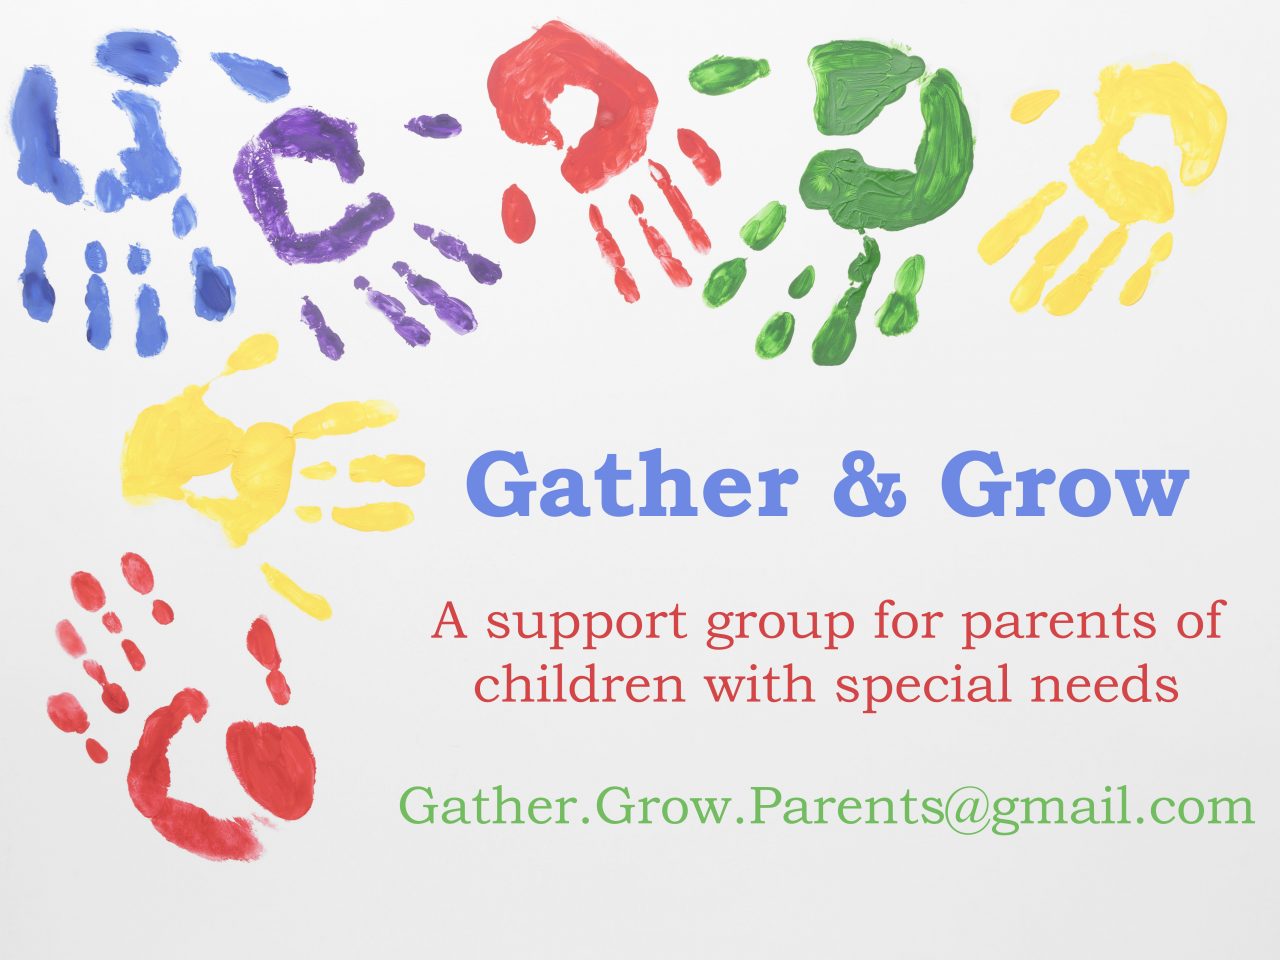 Gather-and-Grow-Picture-1280x960.jpg